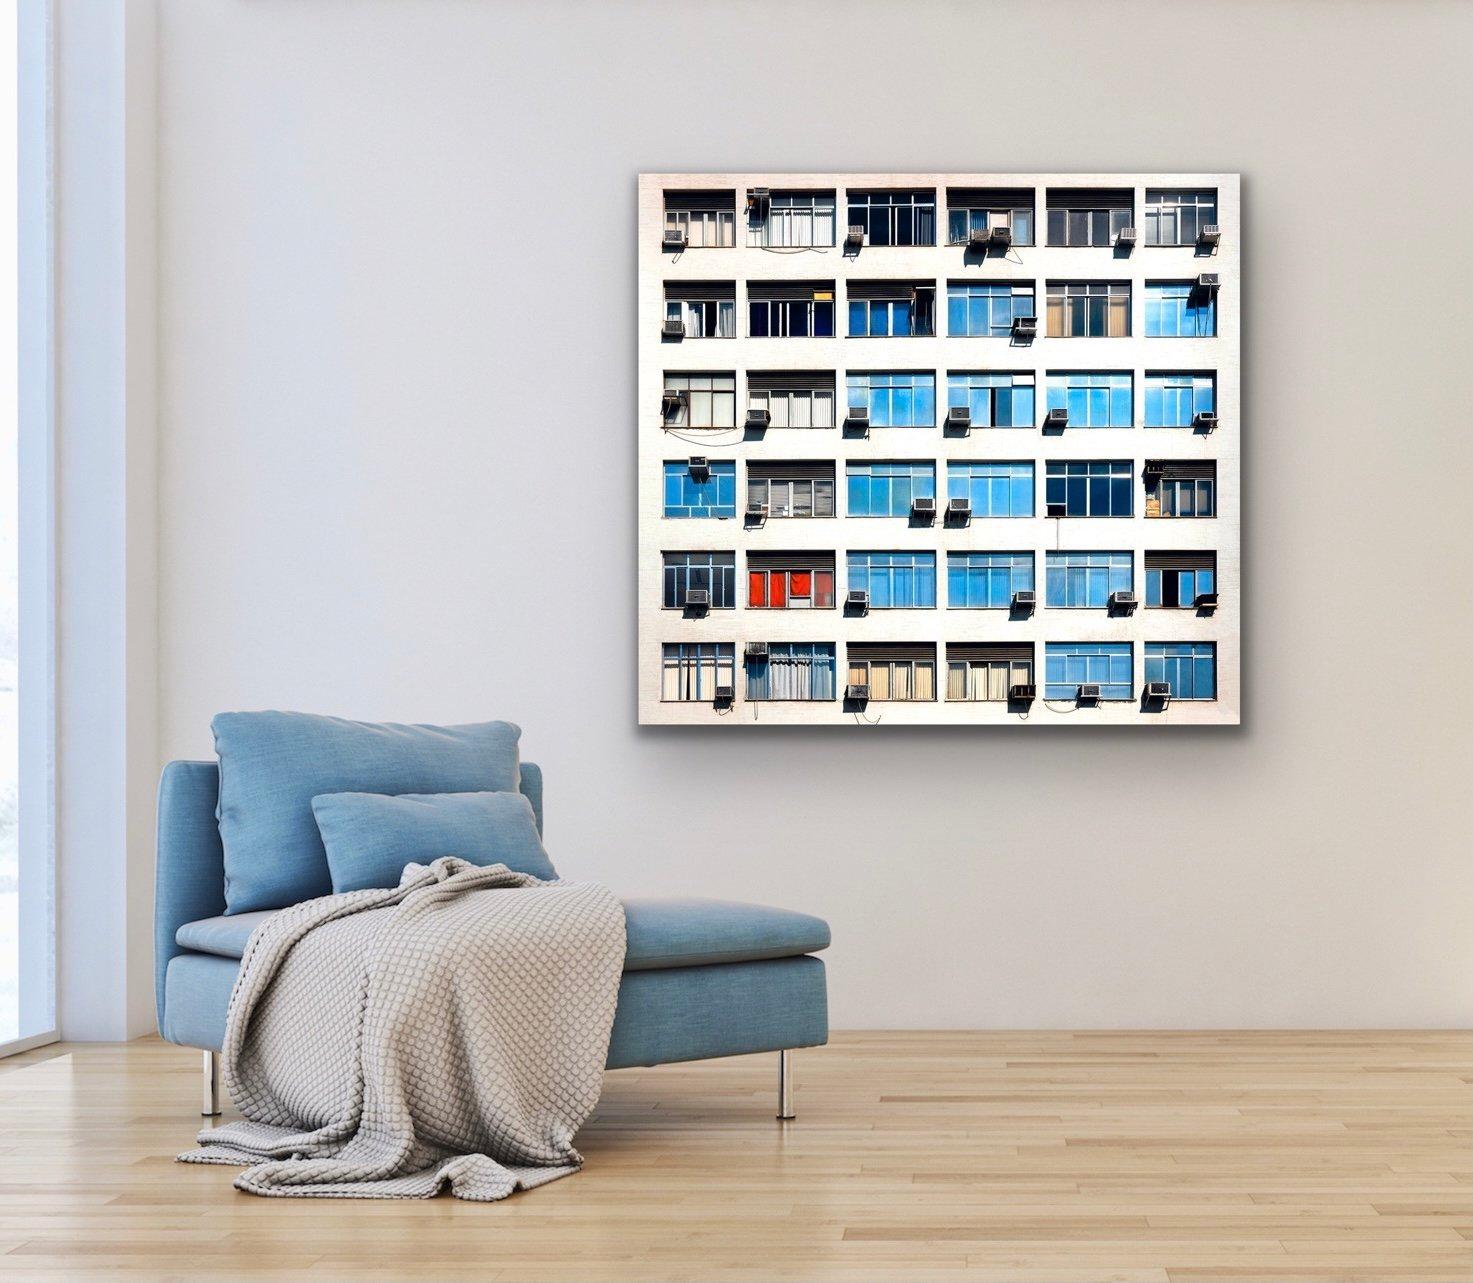 18 Flats by Barry Cawston 90 x 82.5cm C-type Photographic Print Only For Sale 1